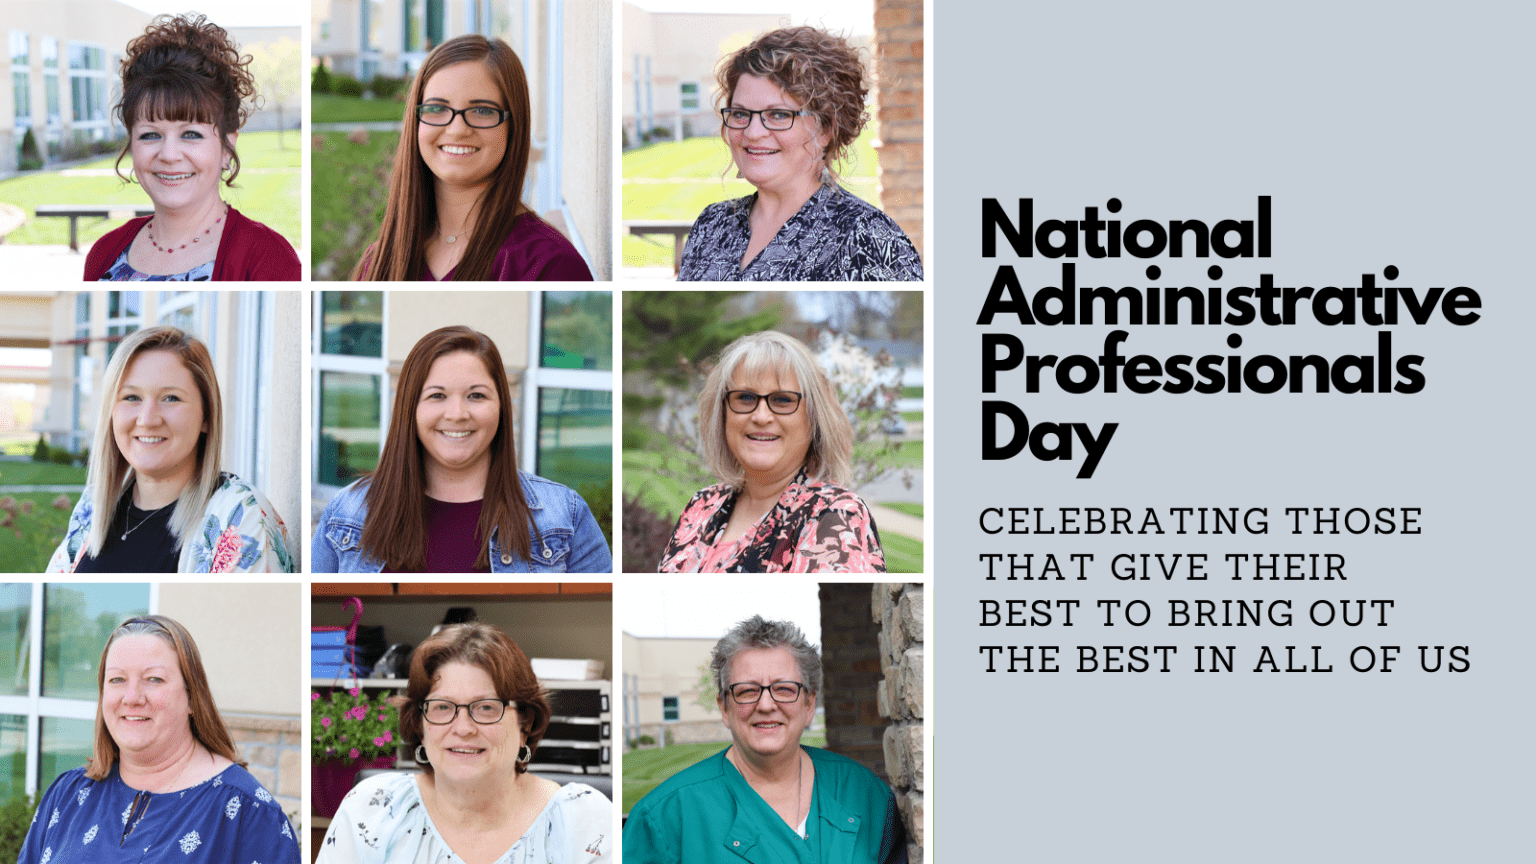 National Administrative Professionals Day Celebrating those that give